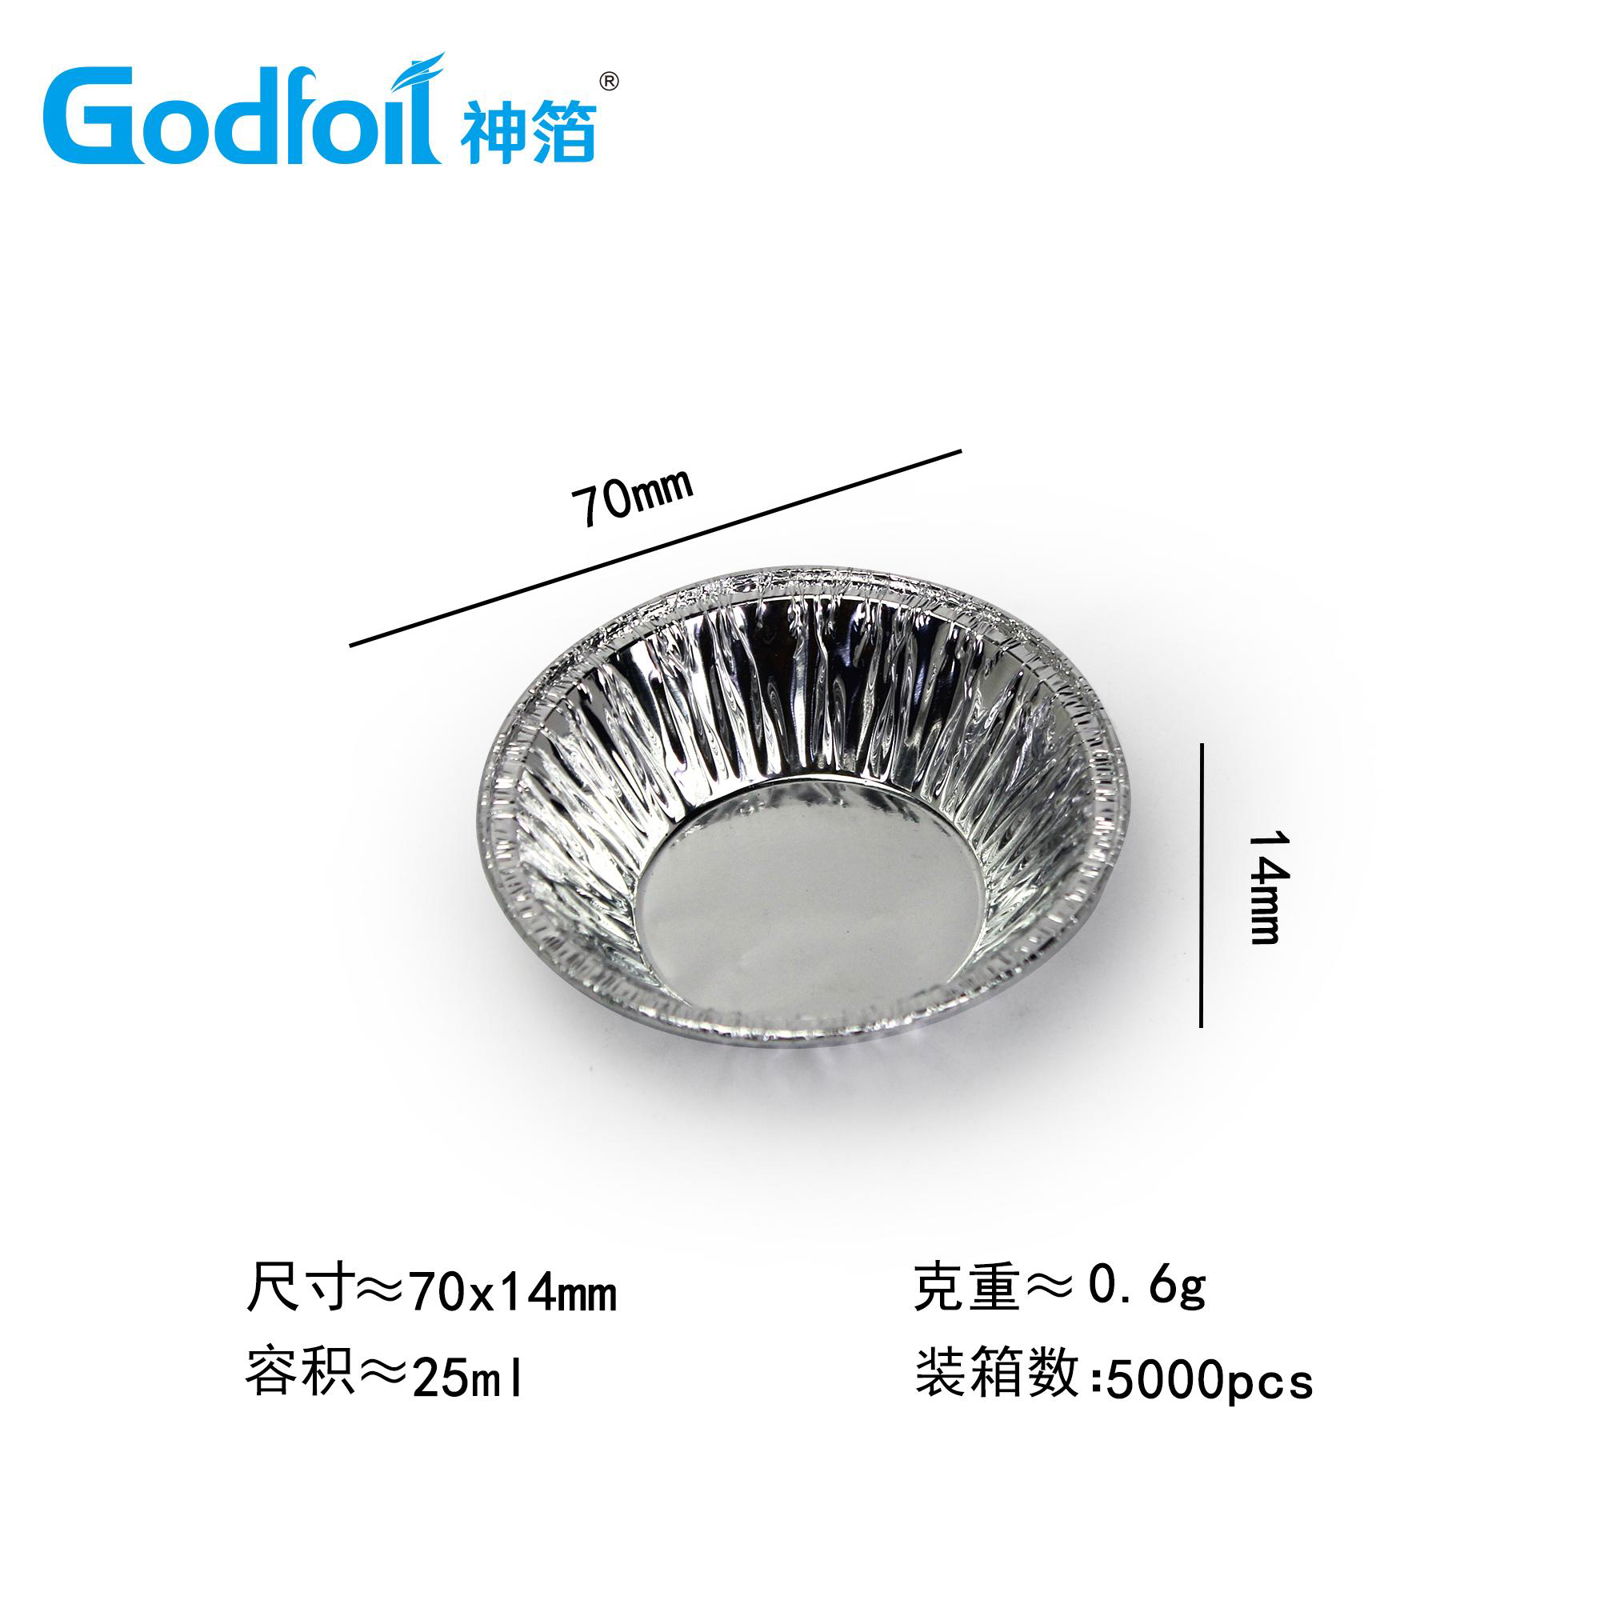 Egg Tart Aluminum Container Mould 4